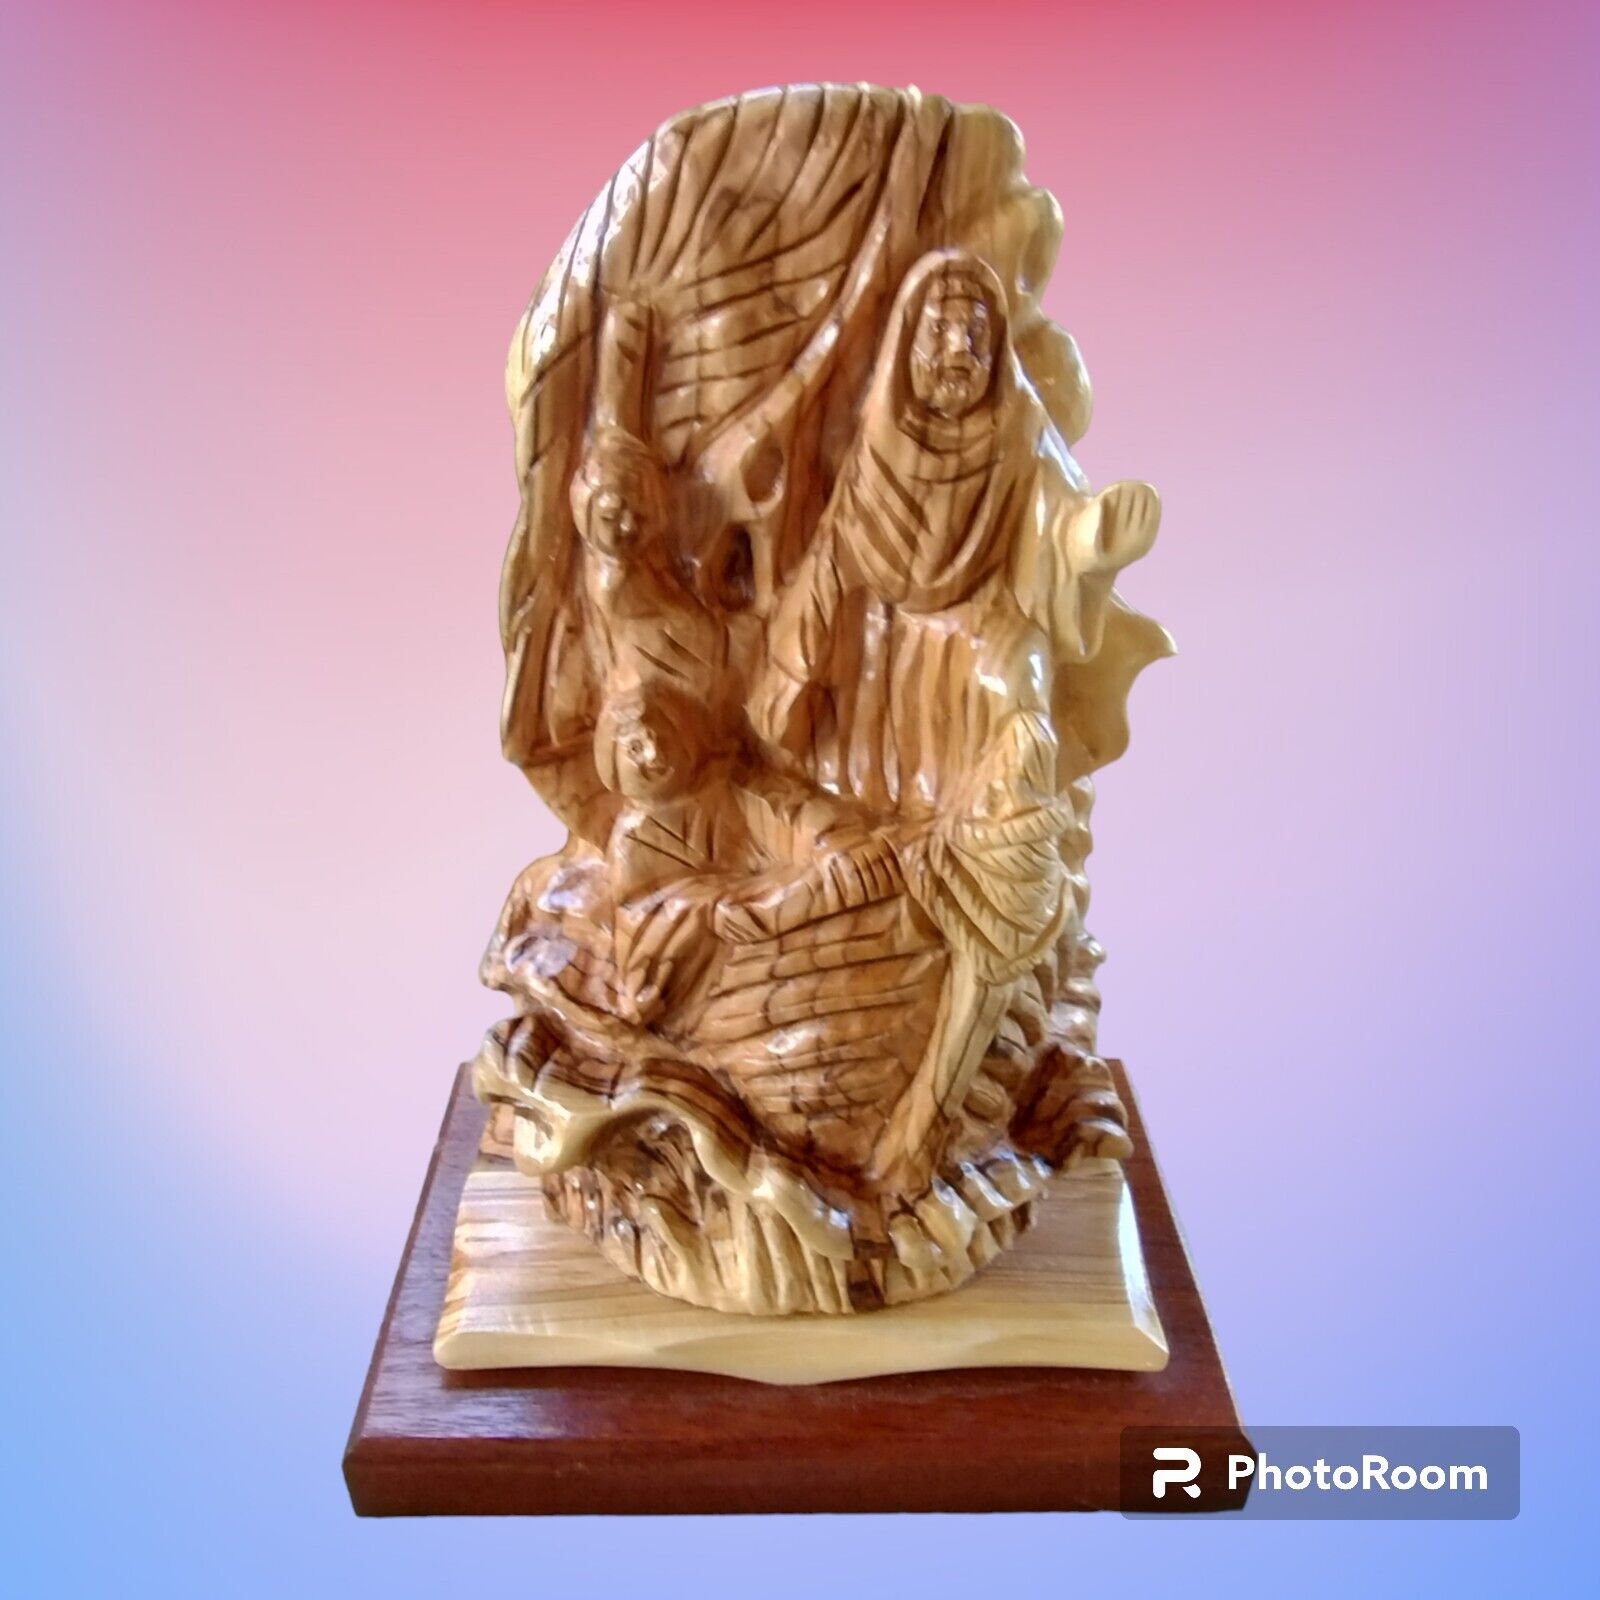 Jesus Calms The Storm Miracle Hand Carved Statue By Bethlehem Art. Religious Art